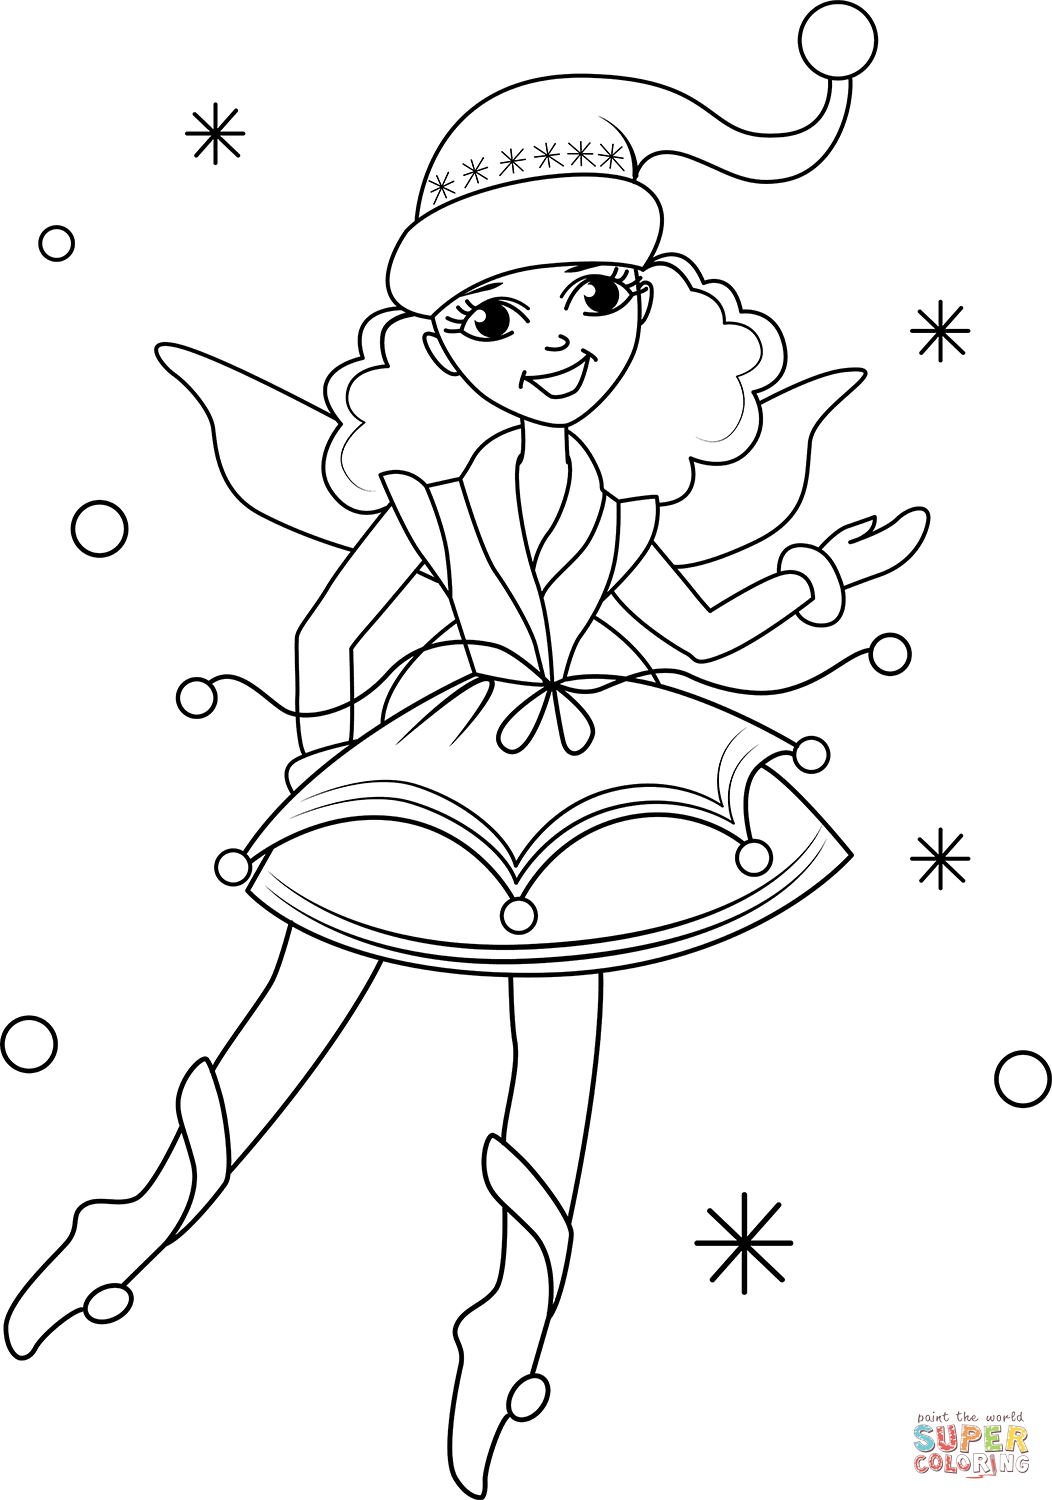 Christmas Fairy coloring page | Free Printable Coloring Pages